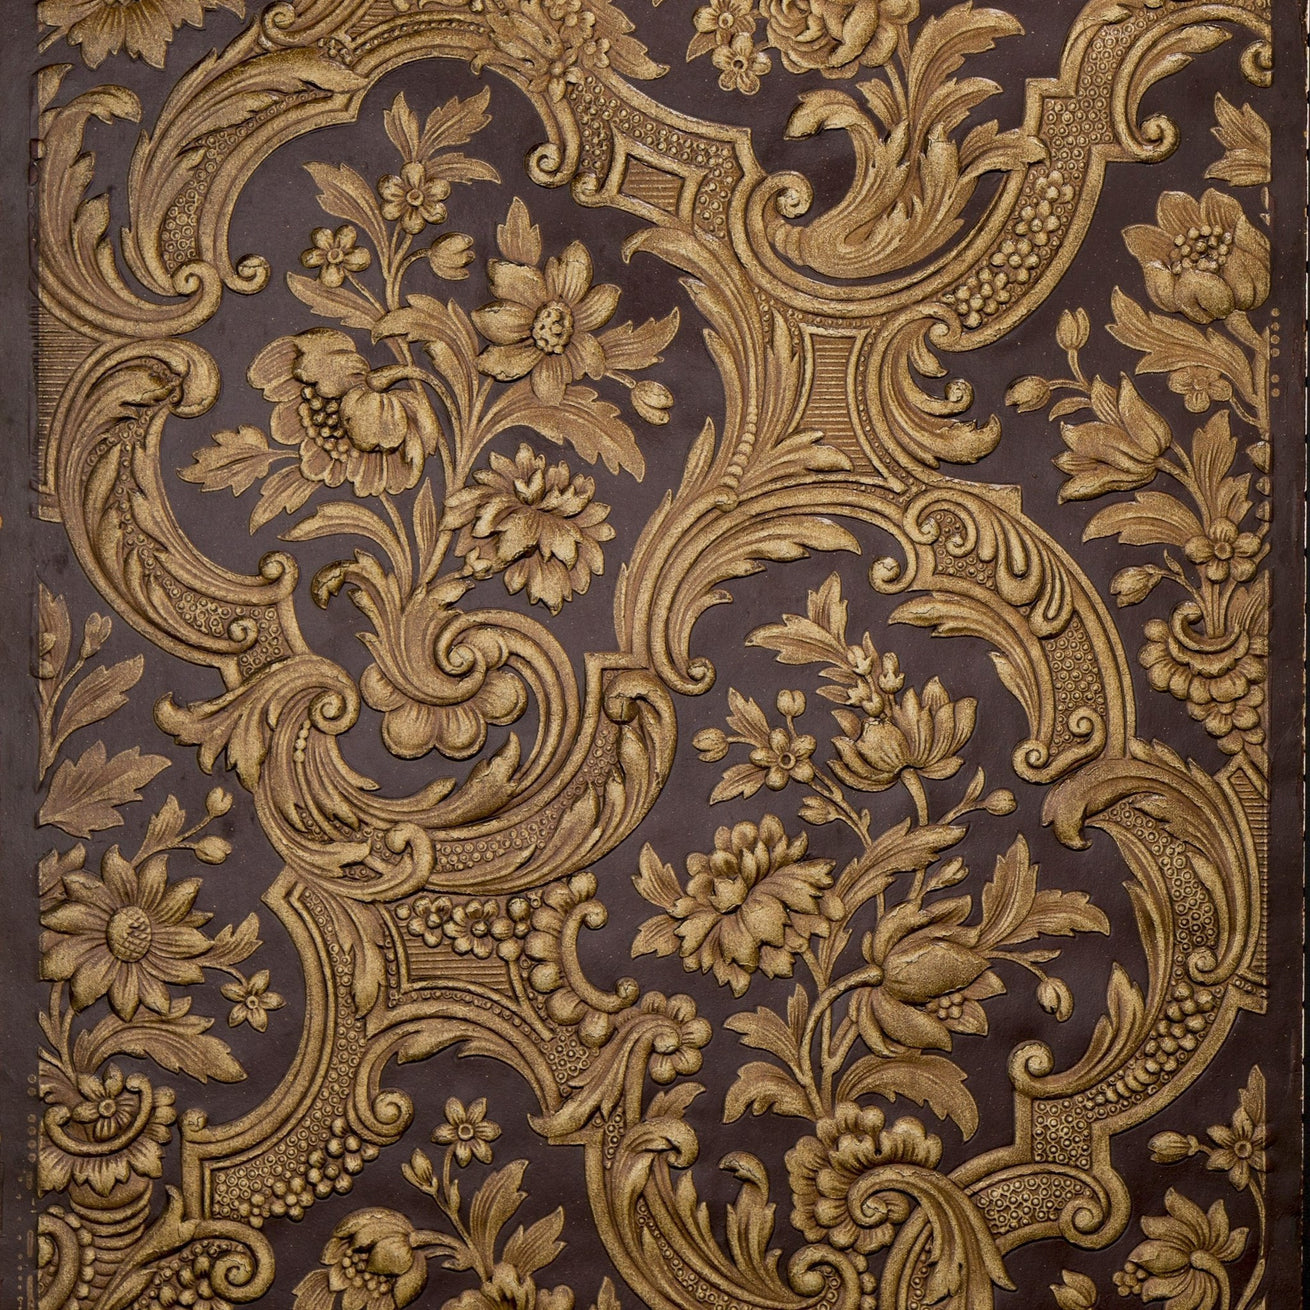 Deeply Embossed Rococo Floral - Antique Wallpaper Remnant